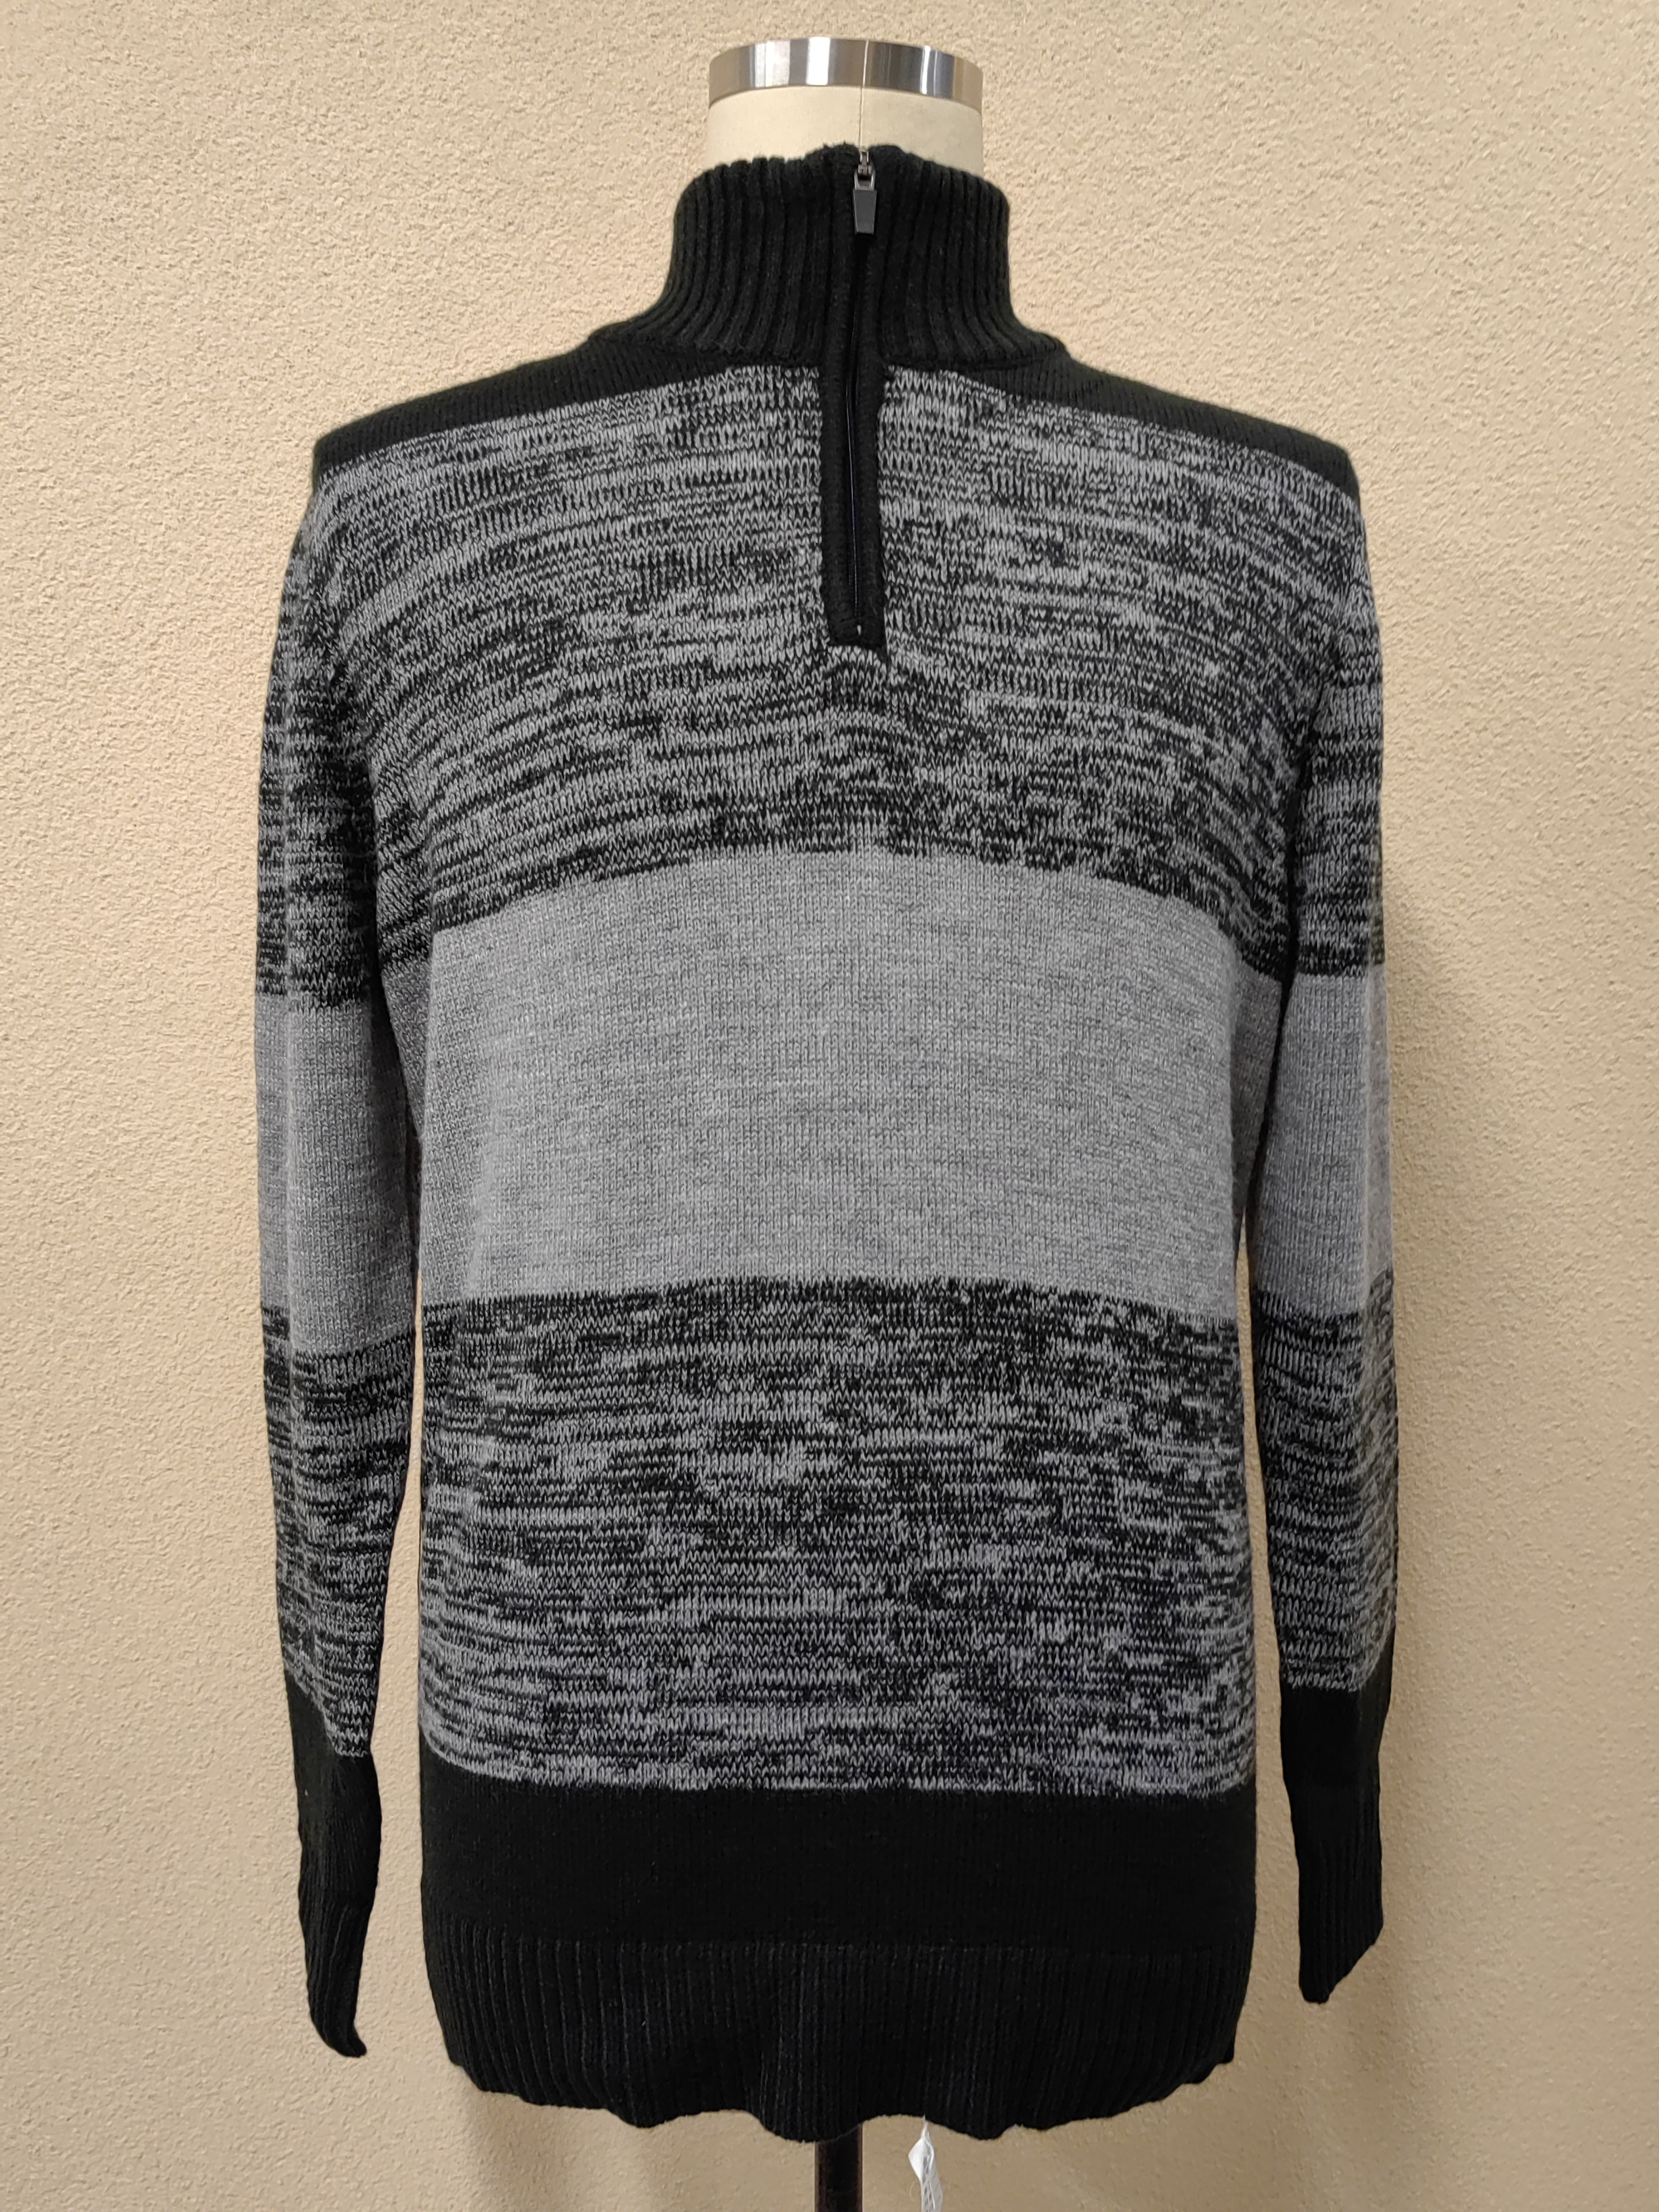 Black And Grey Hand Knitted Long Sleeve Men's Cardigan Striped Colorblock Sweater Open Chest Sweater